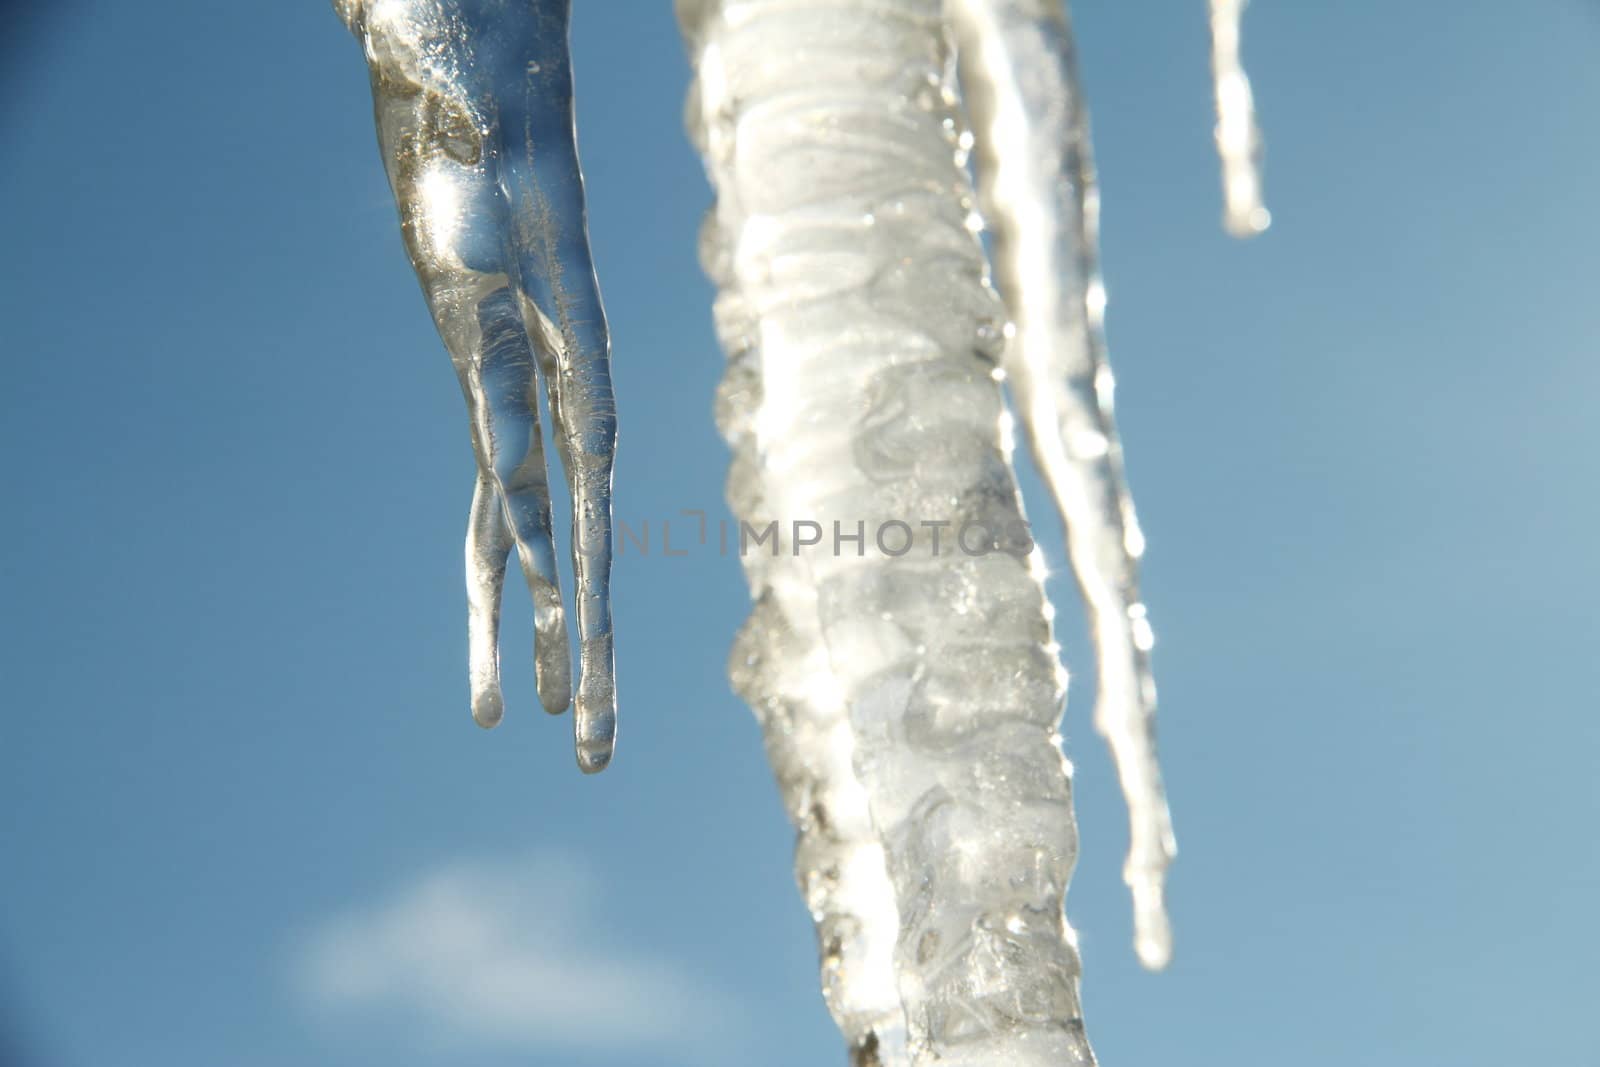 Icicle hanging against a blue sky with sunlight shinning through them.